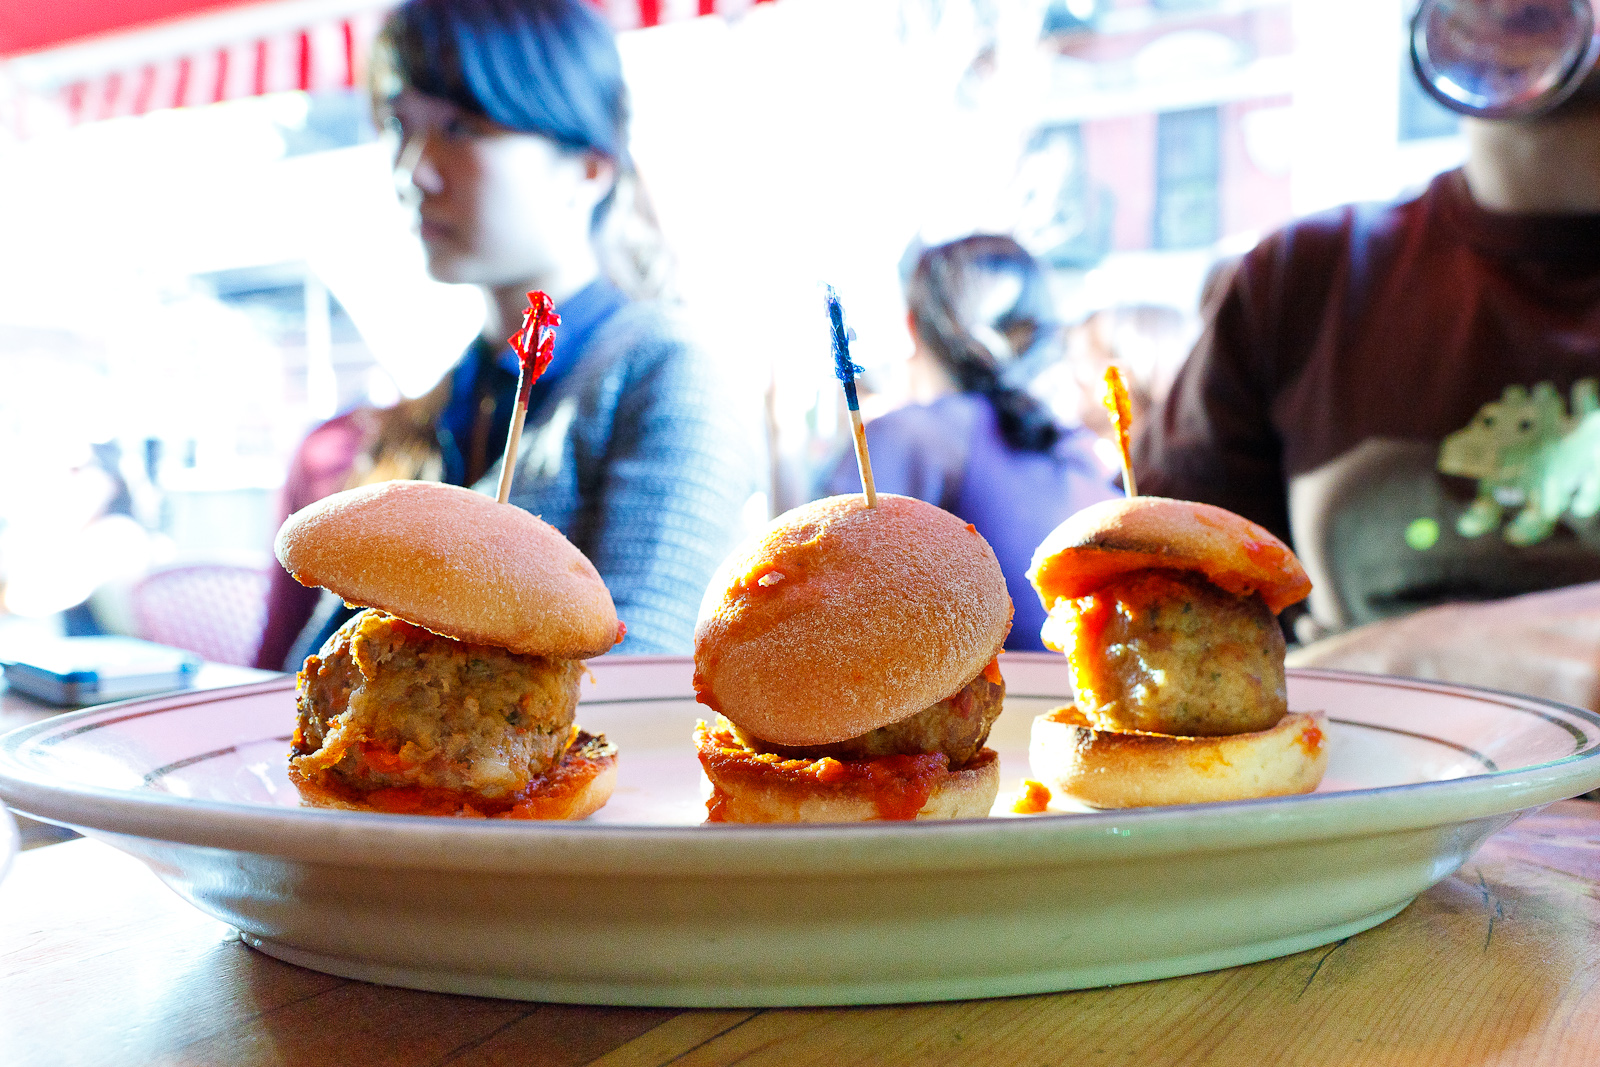 Classic beef, spicy pork, chicken sliders with tomato sauce ($9)